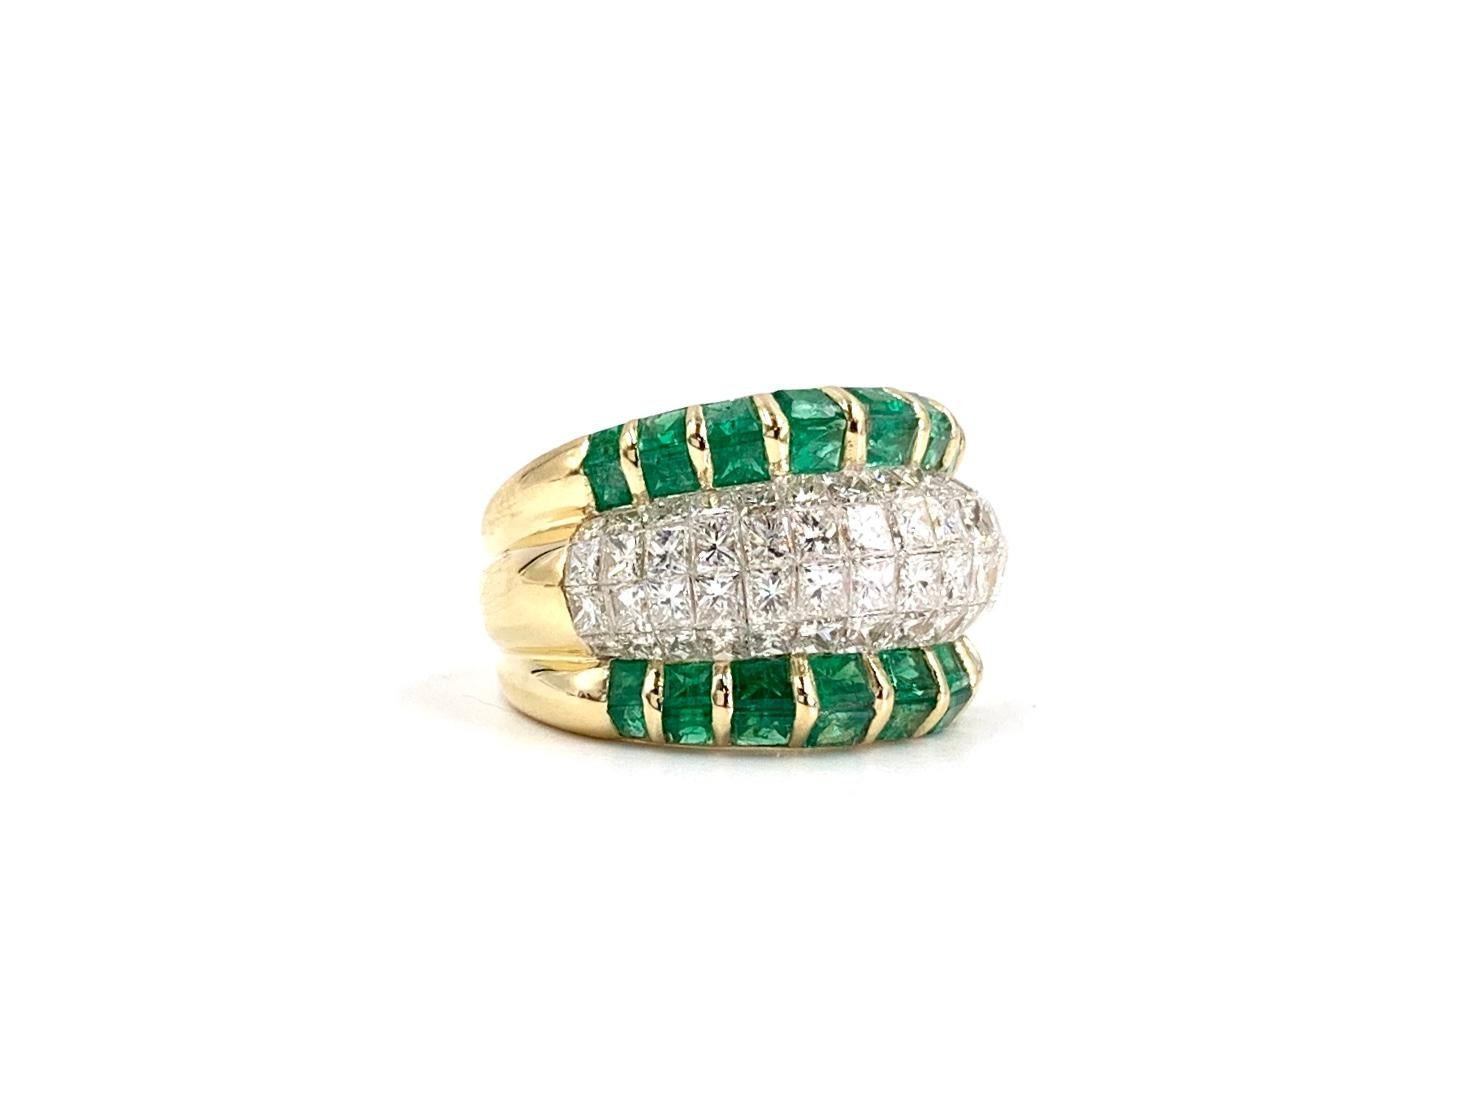 A very well made, uniquely designed 18 karat yellow gold wide ring featuring a center section adorned with 4 rows of expertly invisibly set seamless princess cut diamonds lined with two rows of princess cut emeralds on each side. Diamond total